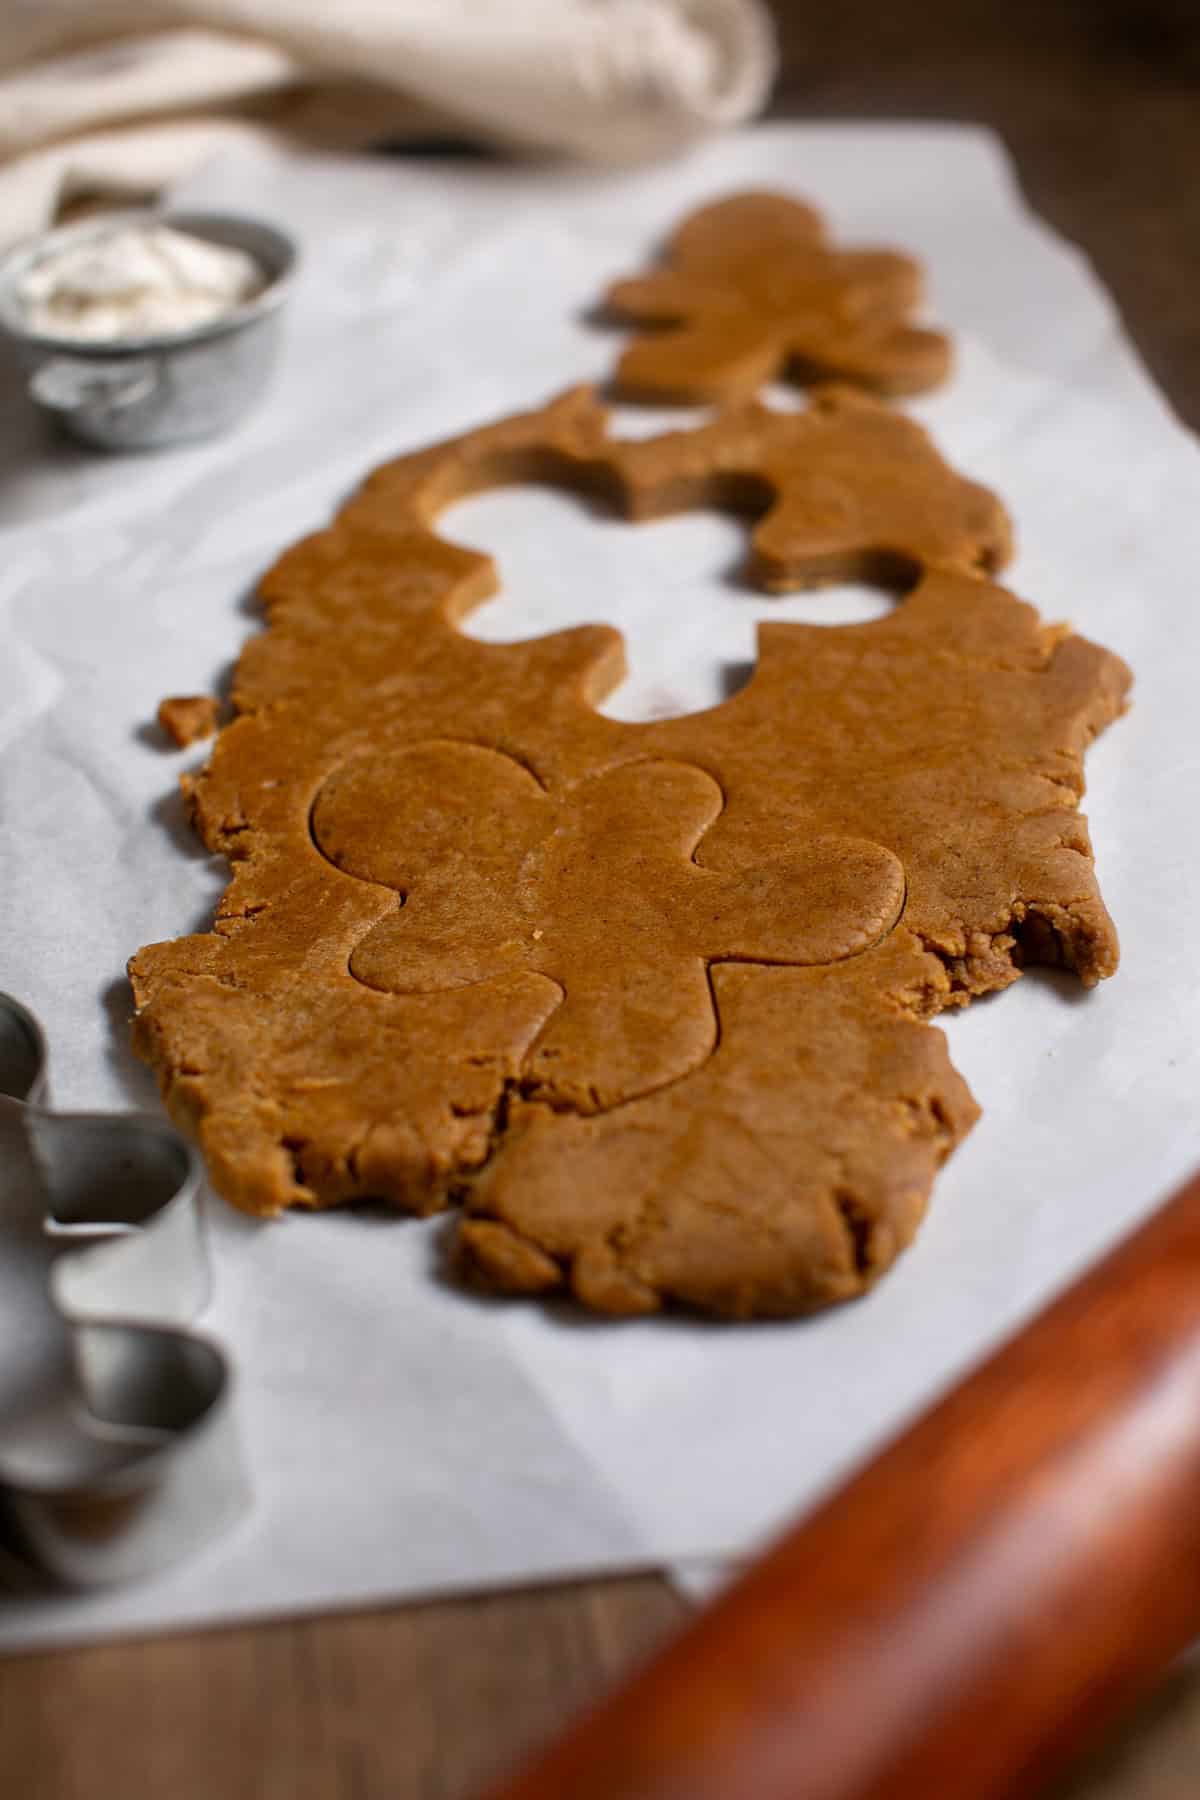 Gingerbread cut out of dough.